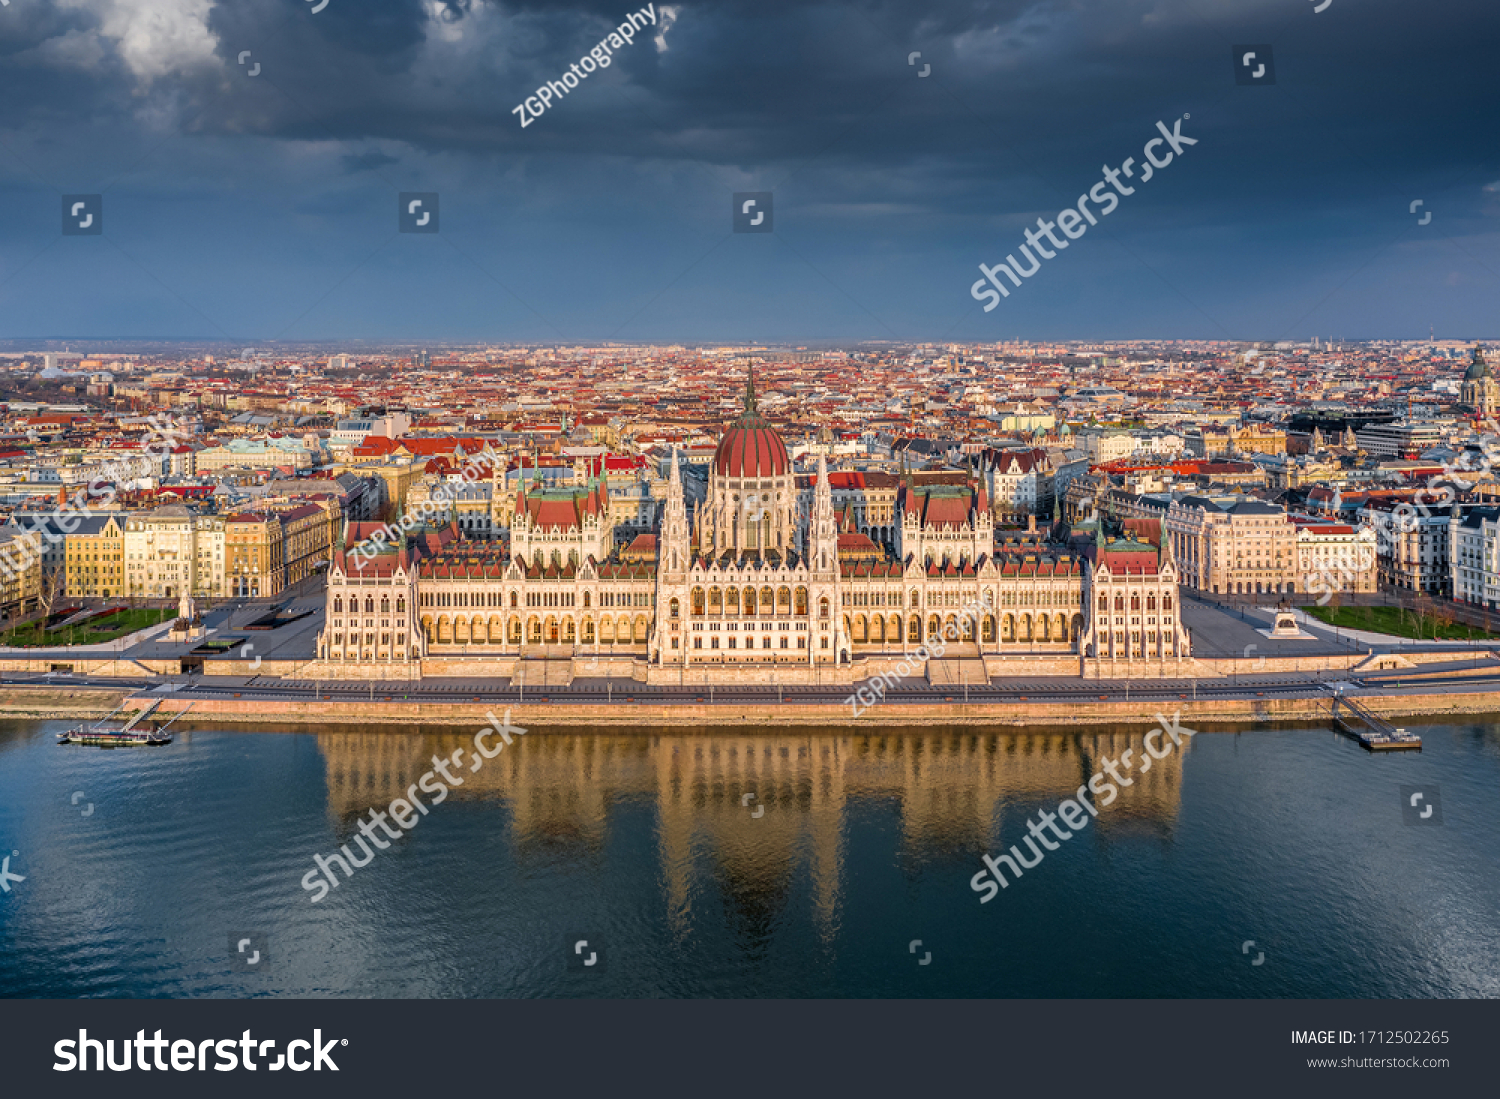 Budapest, Hungary - Aerial view of the beautiful Hungarian Parliament building with reflection and warm golden sunlight at sunset. The streets are totally empty due to the 2020 Coronavirus quarantine #1712502265